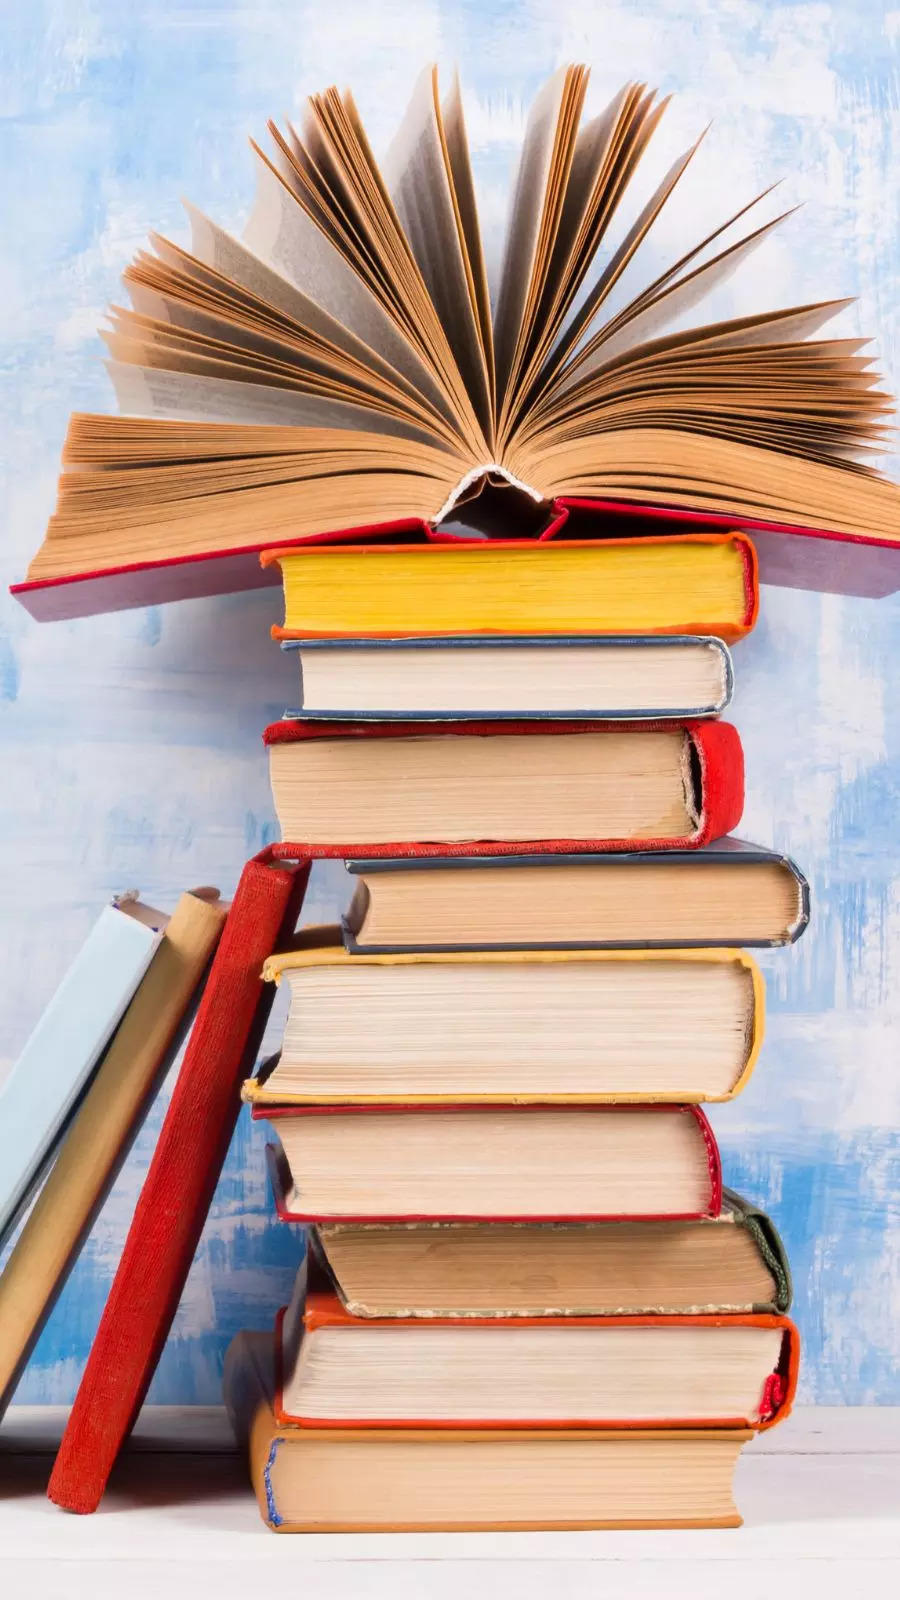 Top 10 Books to Improve English Vocabulary | Times of India